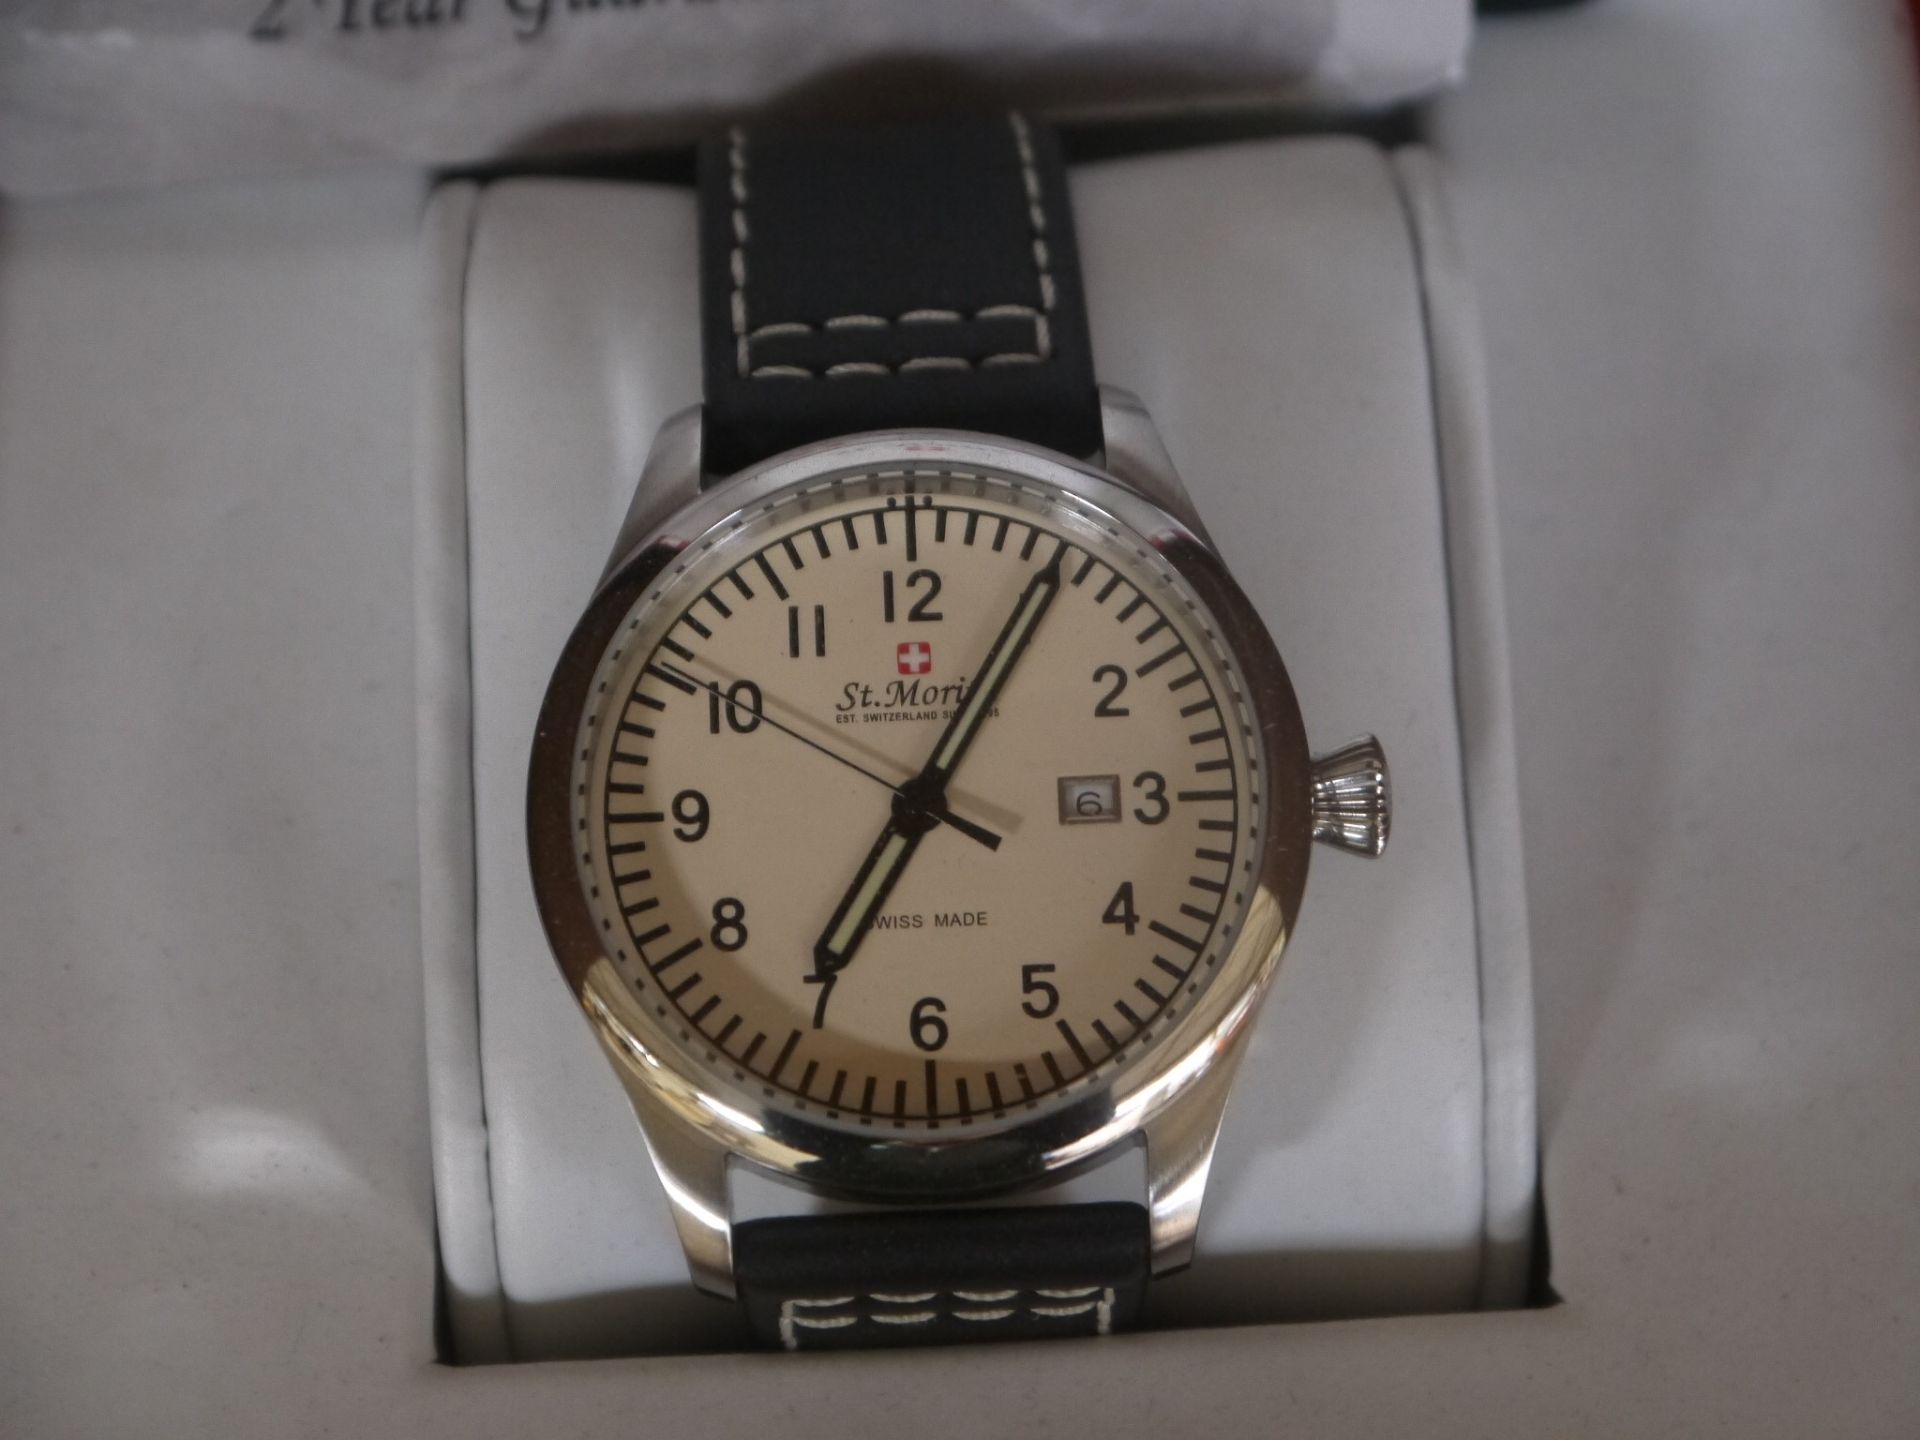 St Moritz of Switzerland Black Leather strapped watch, new and ticking in Presentation box.